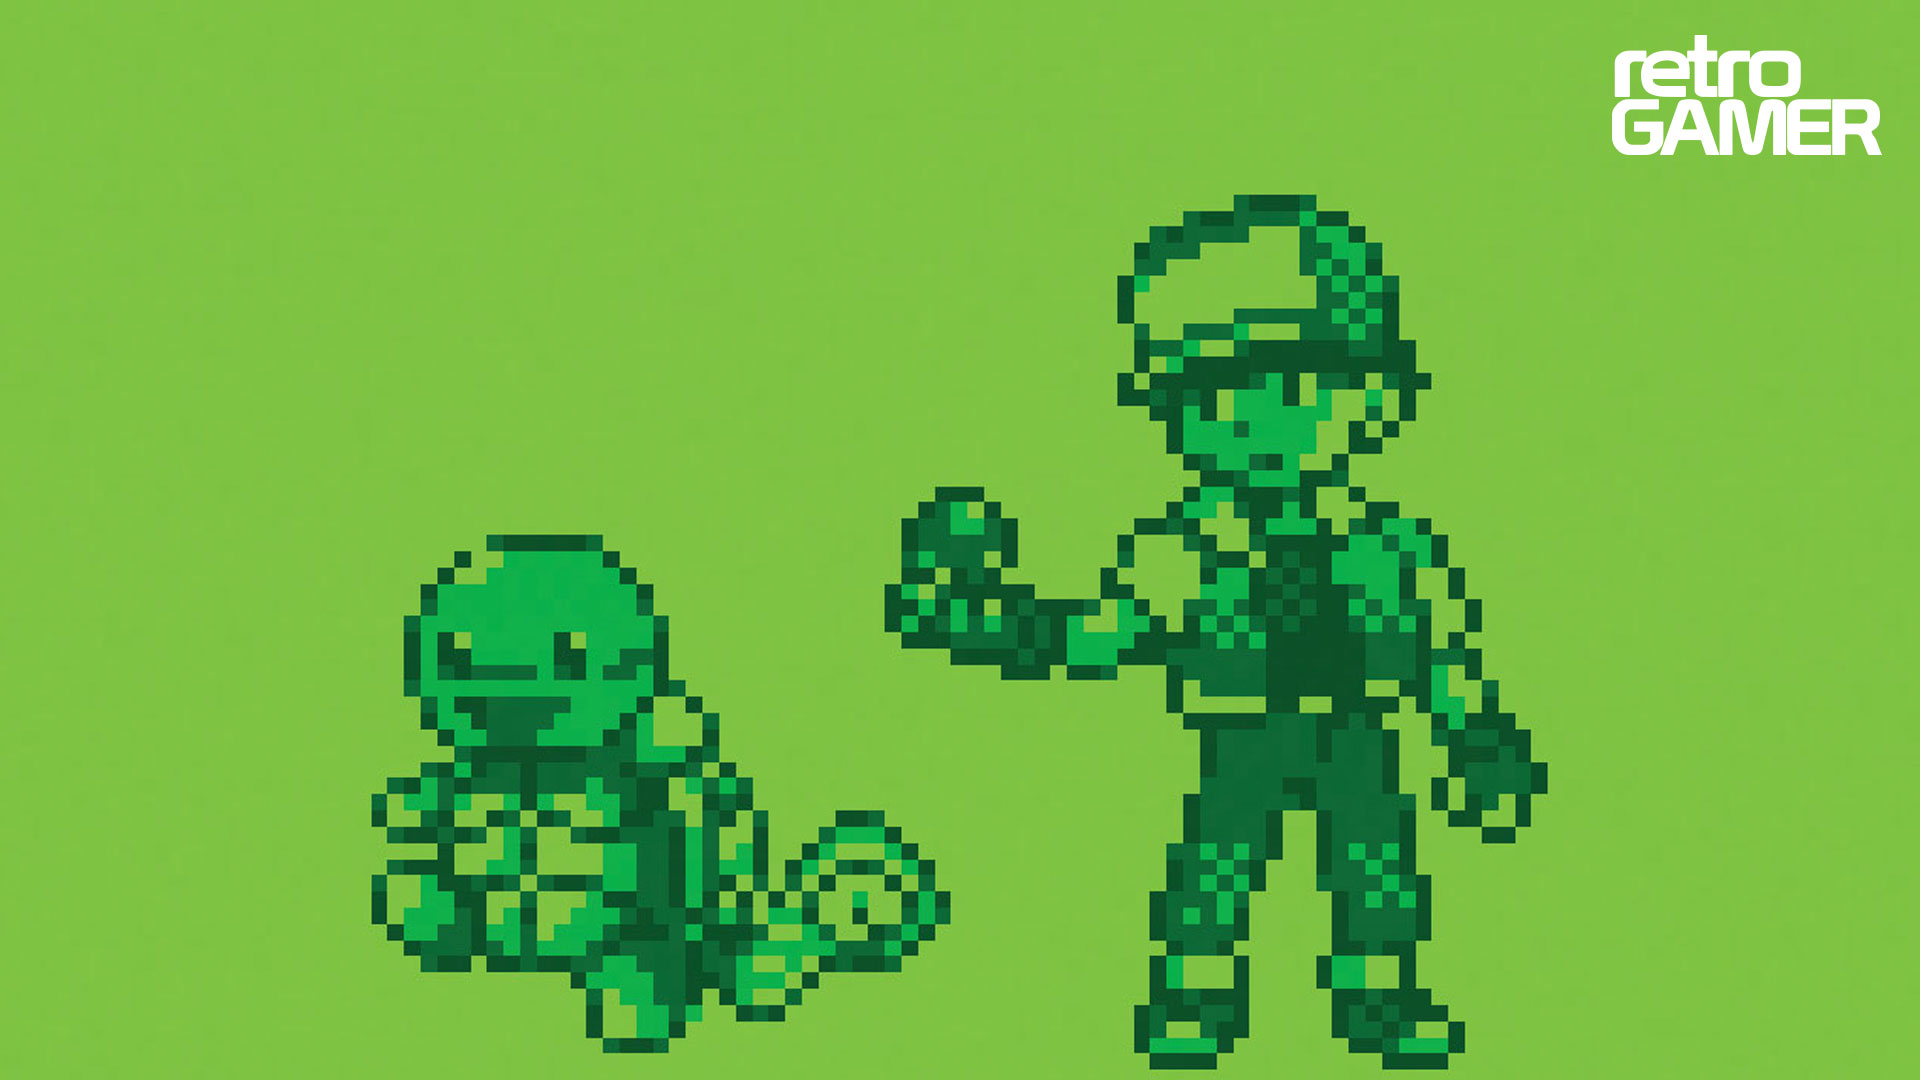 Pokémon Red and Blue (1998), Game Boy Game